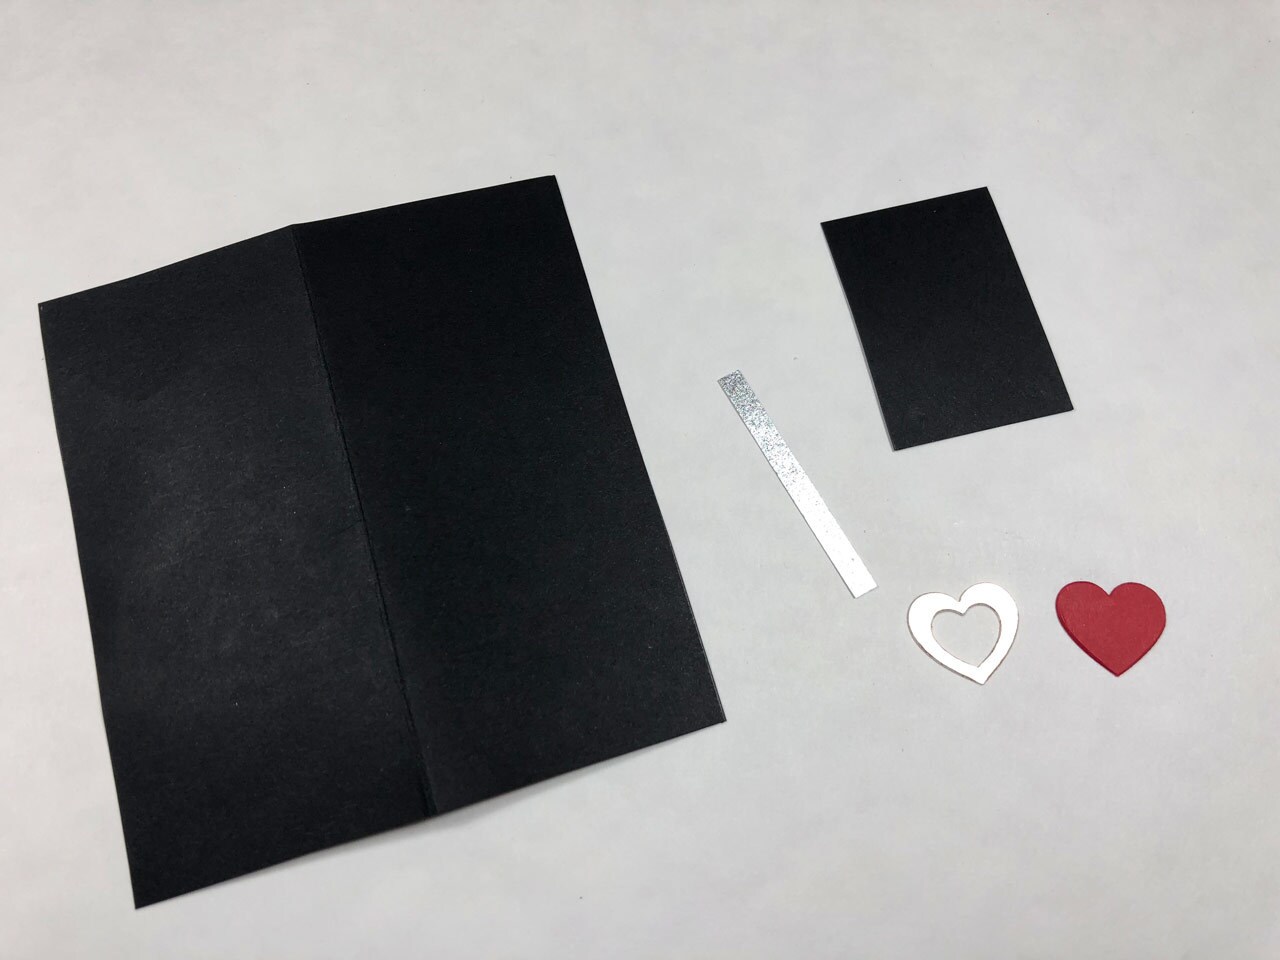 Pieces of black card stock, a strip of silver paper, and red and gold paper hearts. This is a Rose Tico-inspired Electro-Shock Prod Valentine's Day Card in progress.